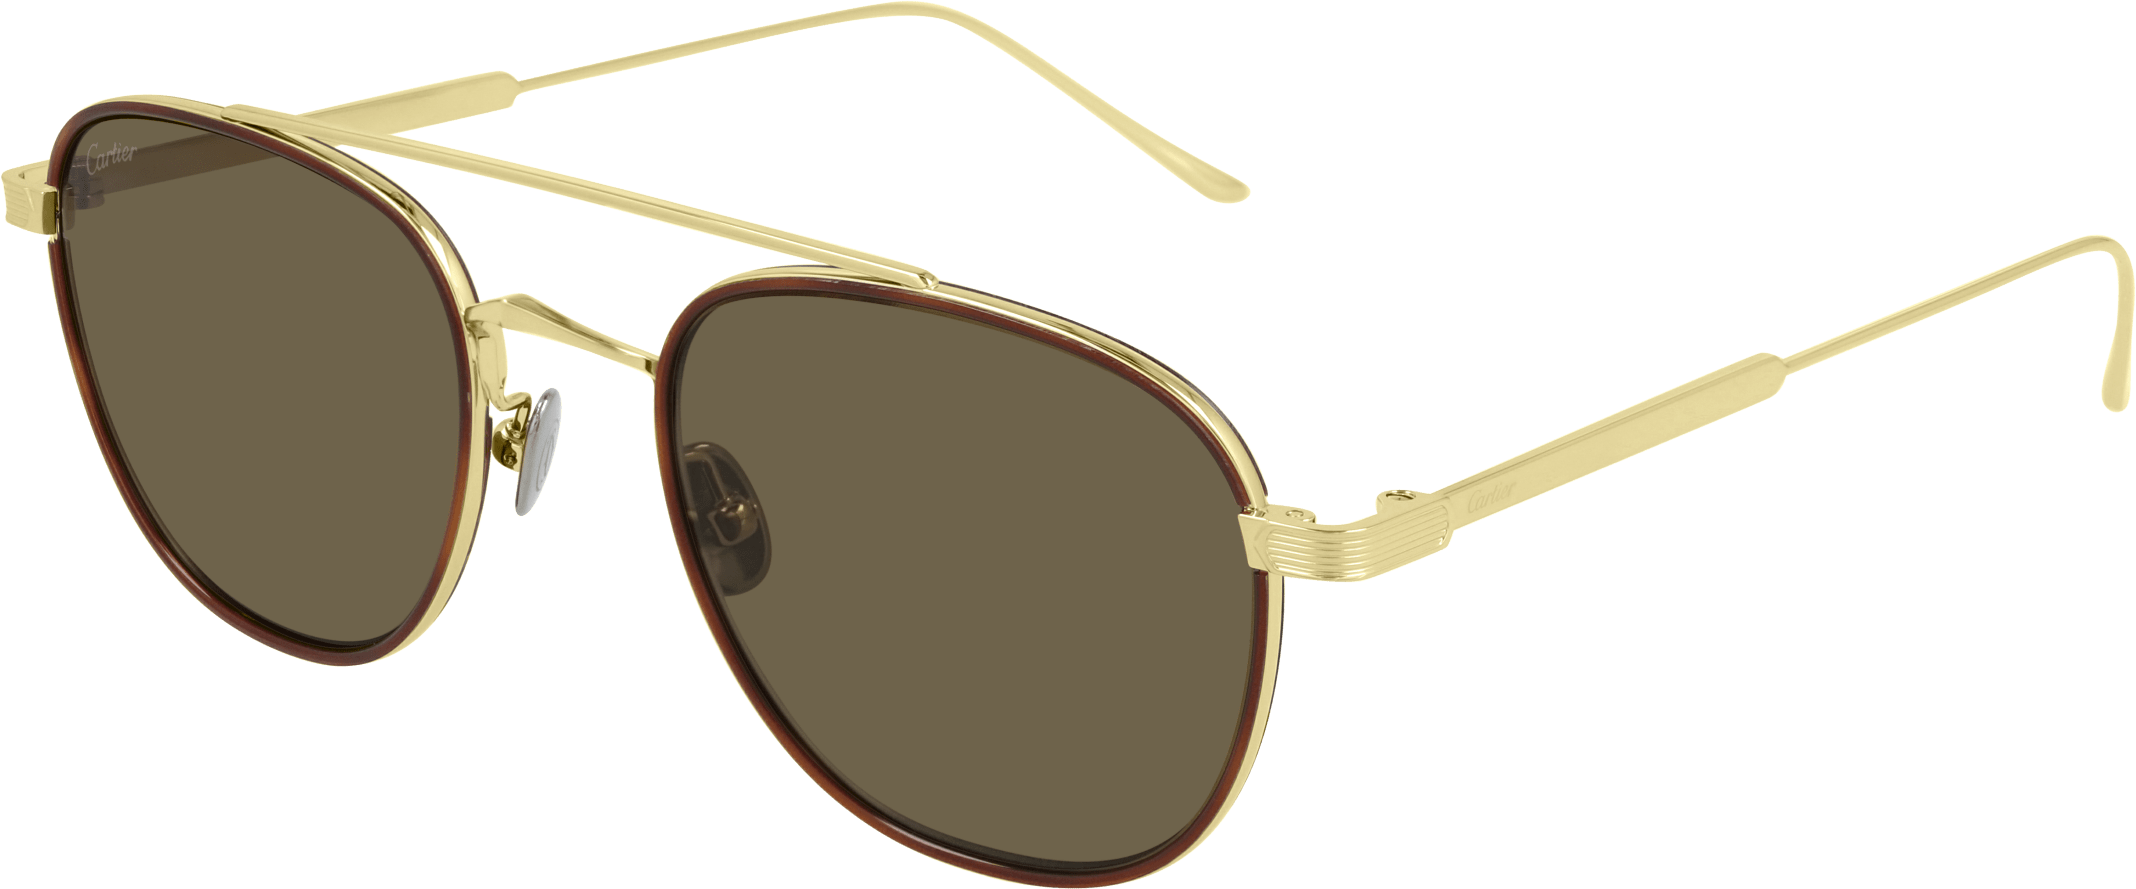 Color_CT0251S-004 - GOLD - BROWN - AR (ANTI REFLECTIVE)